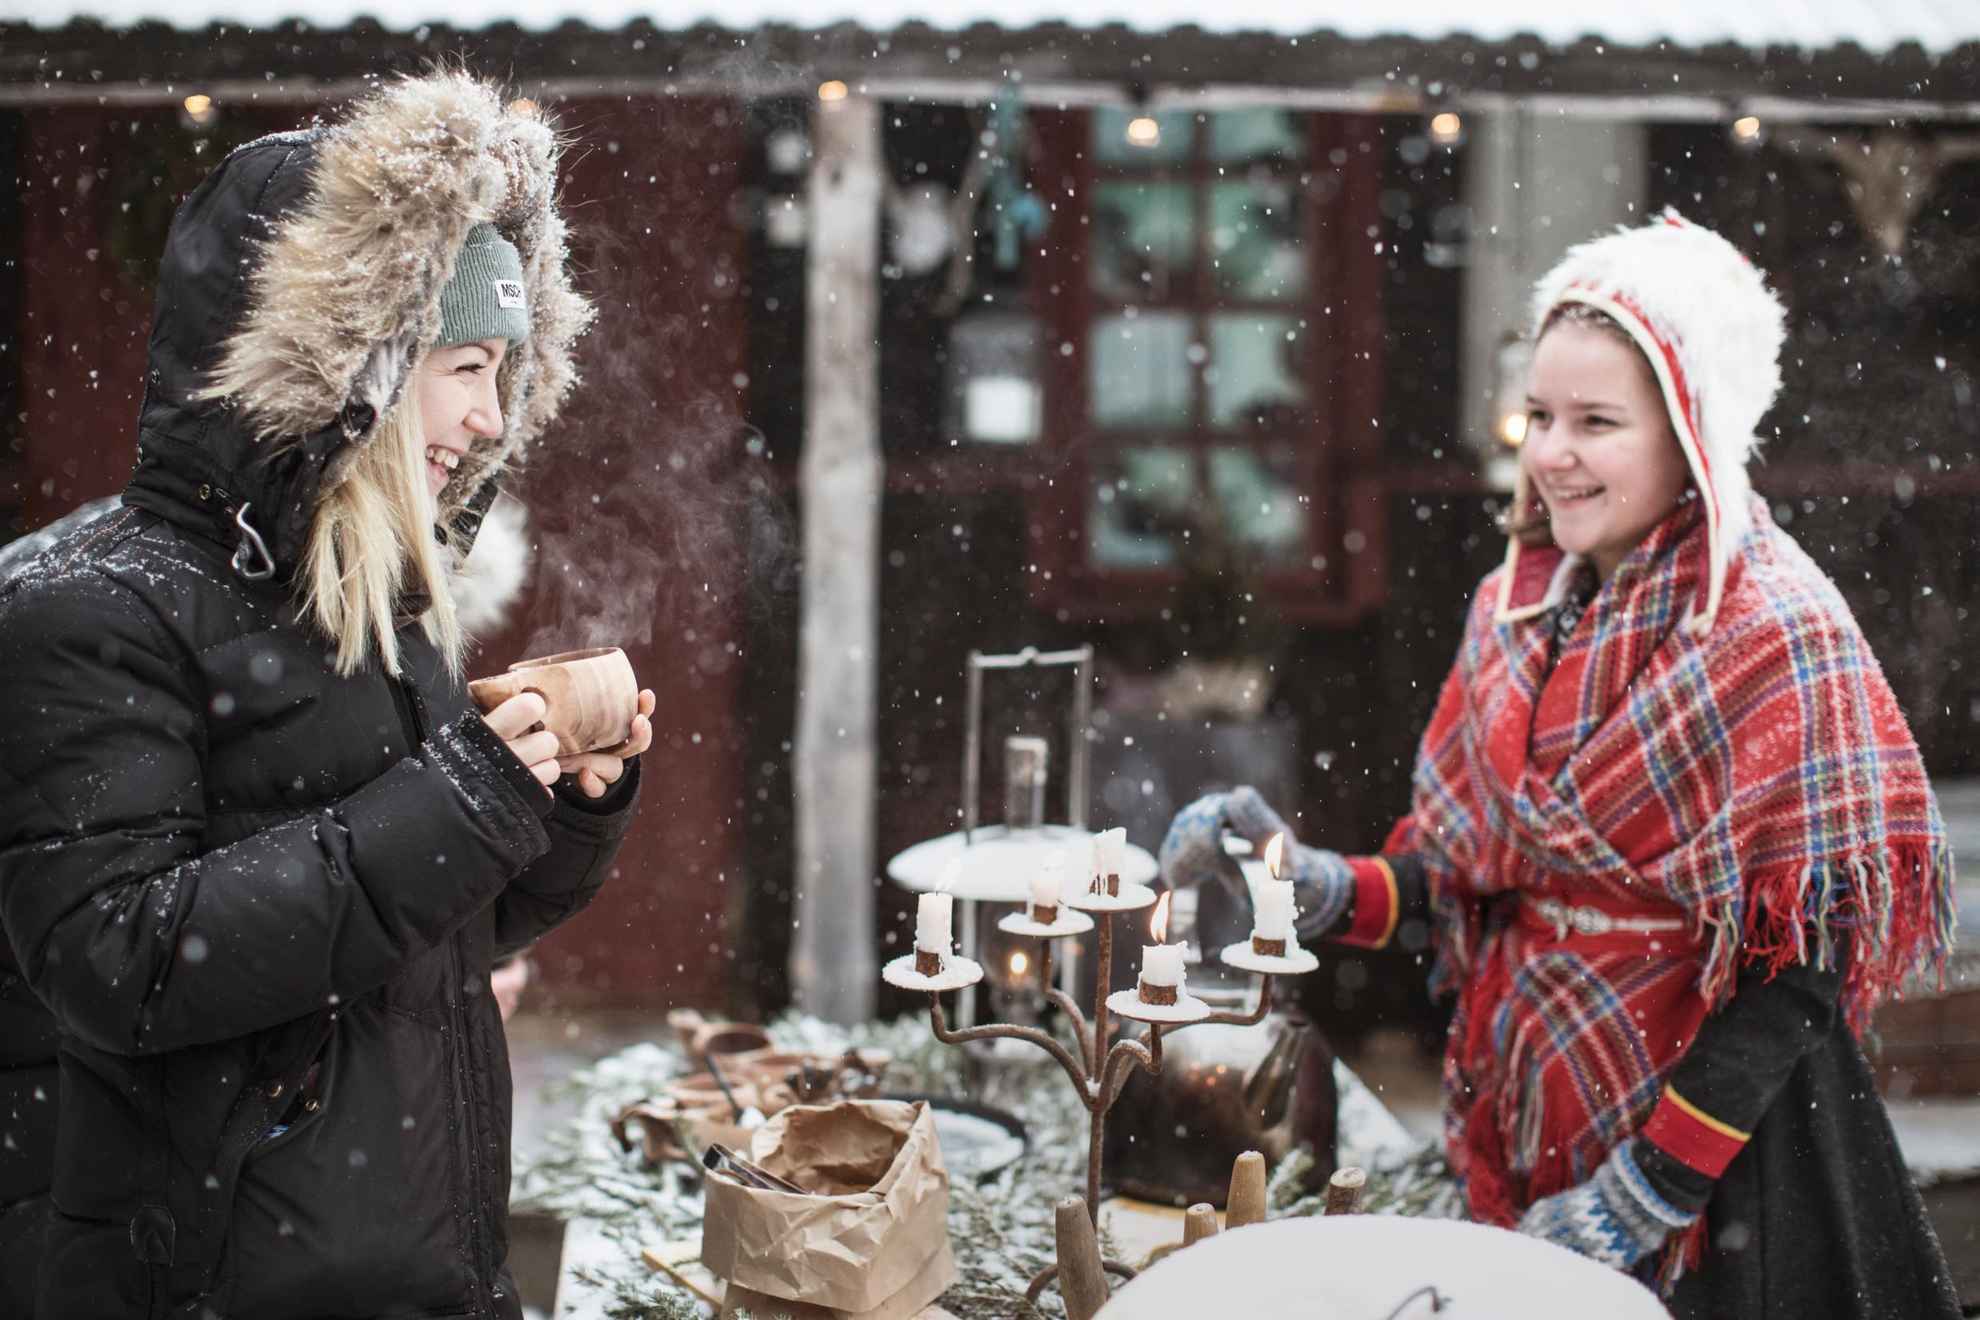 Two women  stands at a table having an outdoor fika in the snow. There are an old candelabra with lit candles on the table. One of the girls are wearing a Sámi costume. It’s snowing.